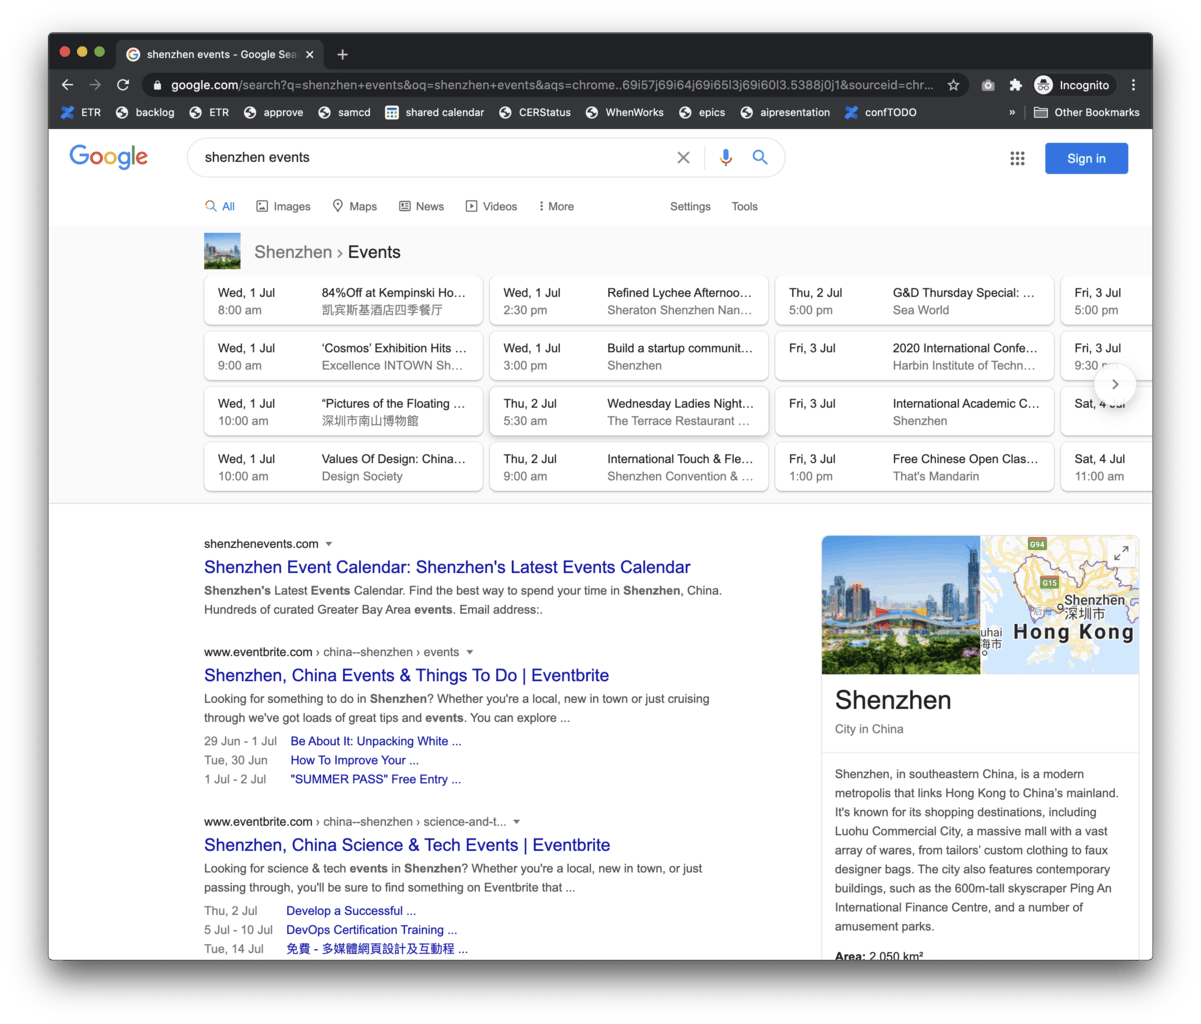 Featured image for “Shenzhen Events becomes #1 for event searches on Google”